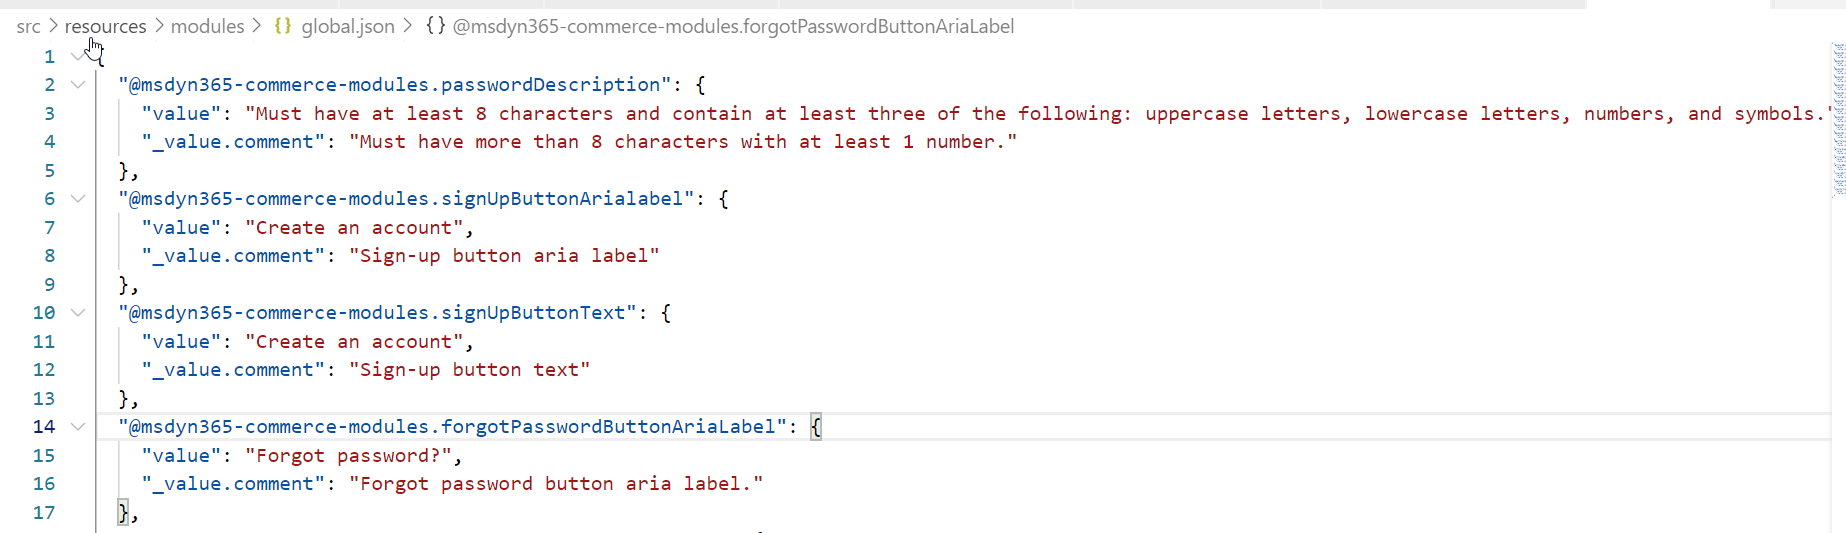 Updated link text in the sign in module's global.json file.